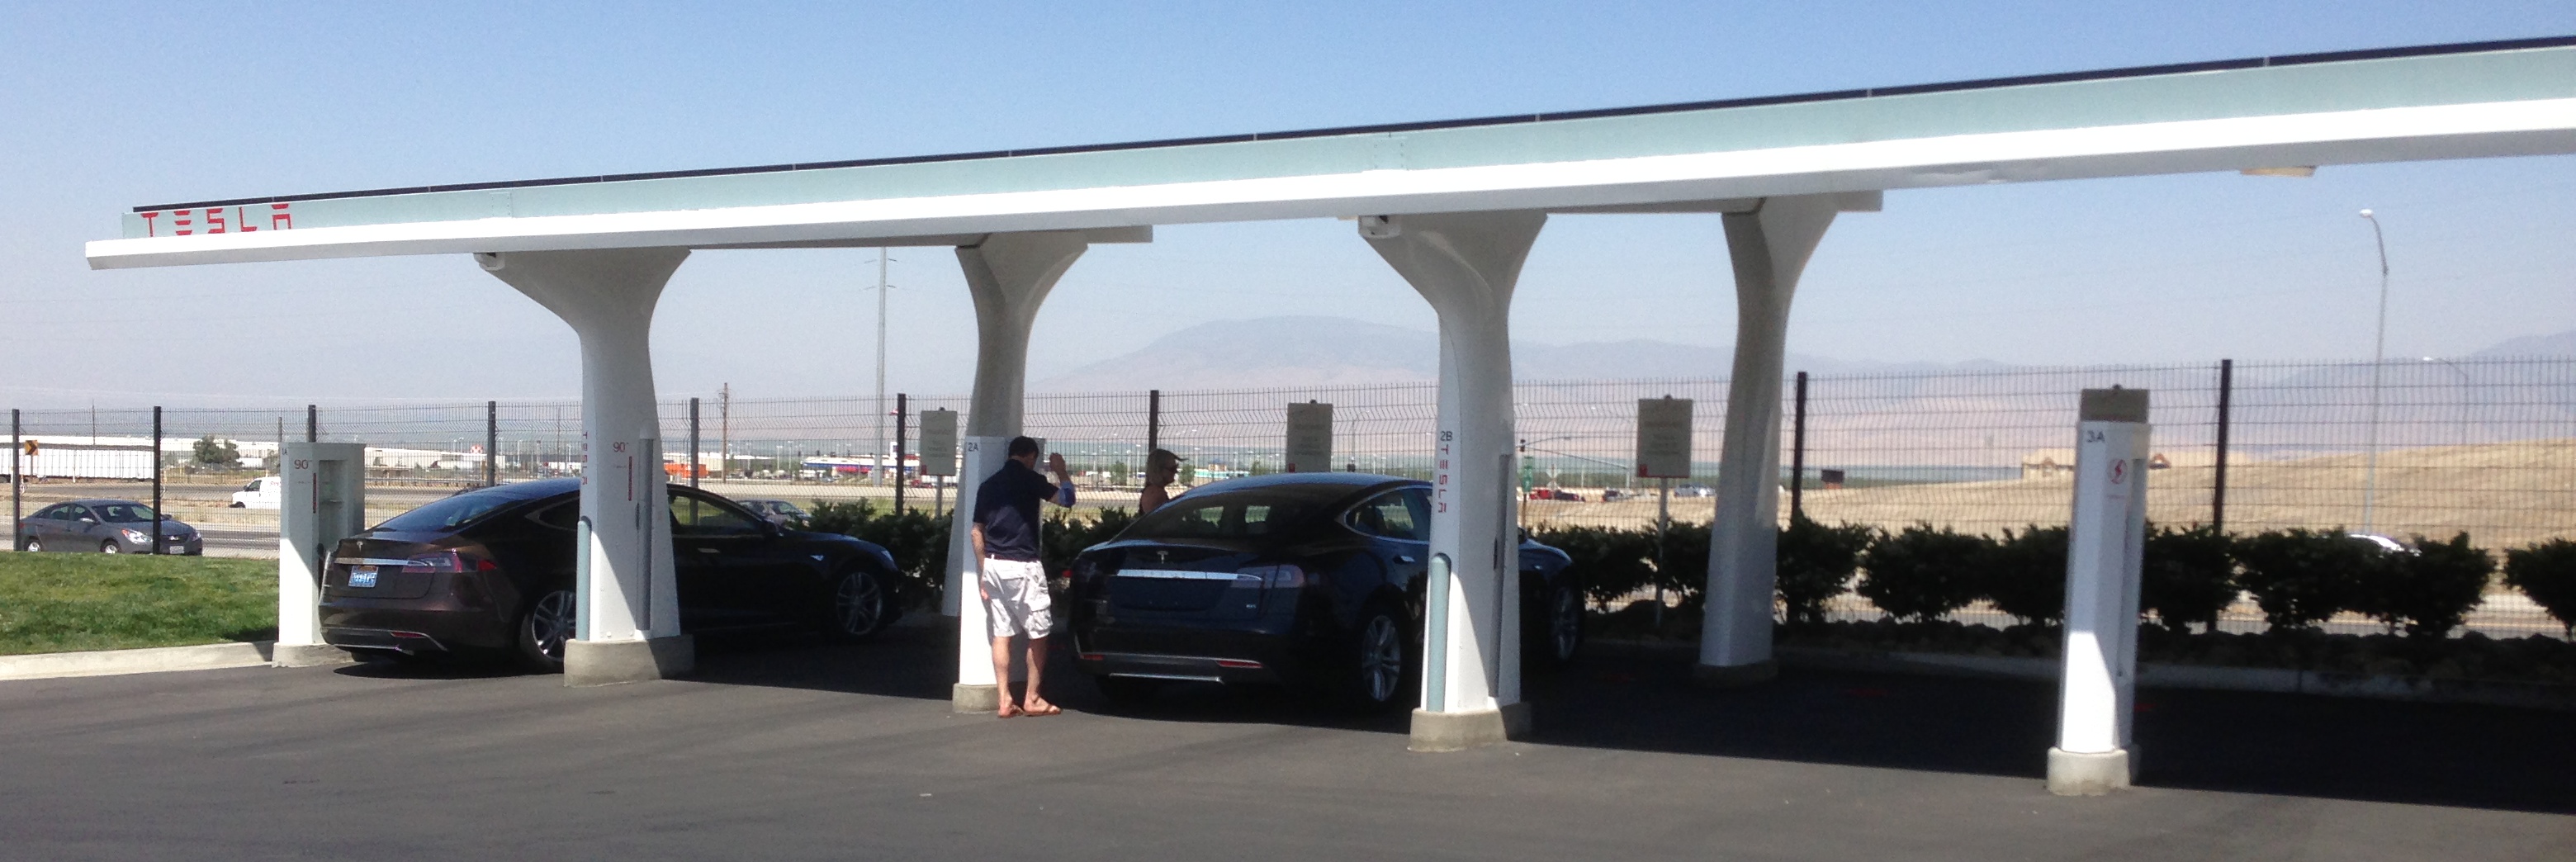 Tesla_charging_station_with_solar_collector_trimmed.jpeg